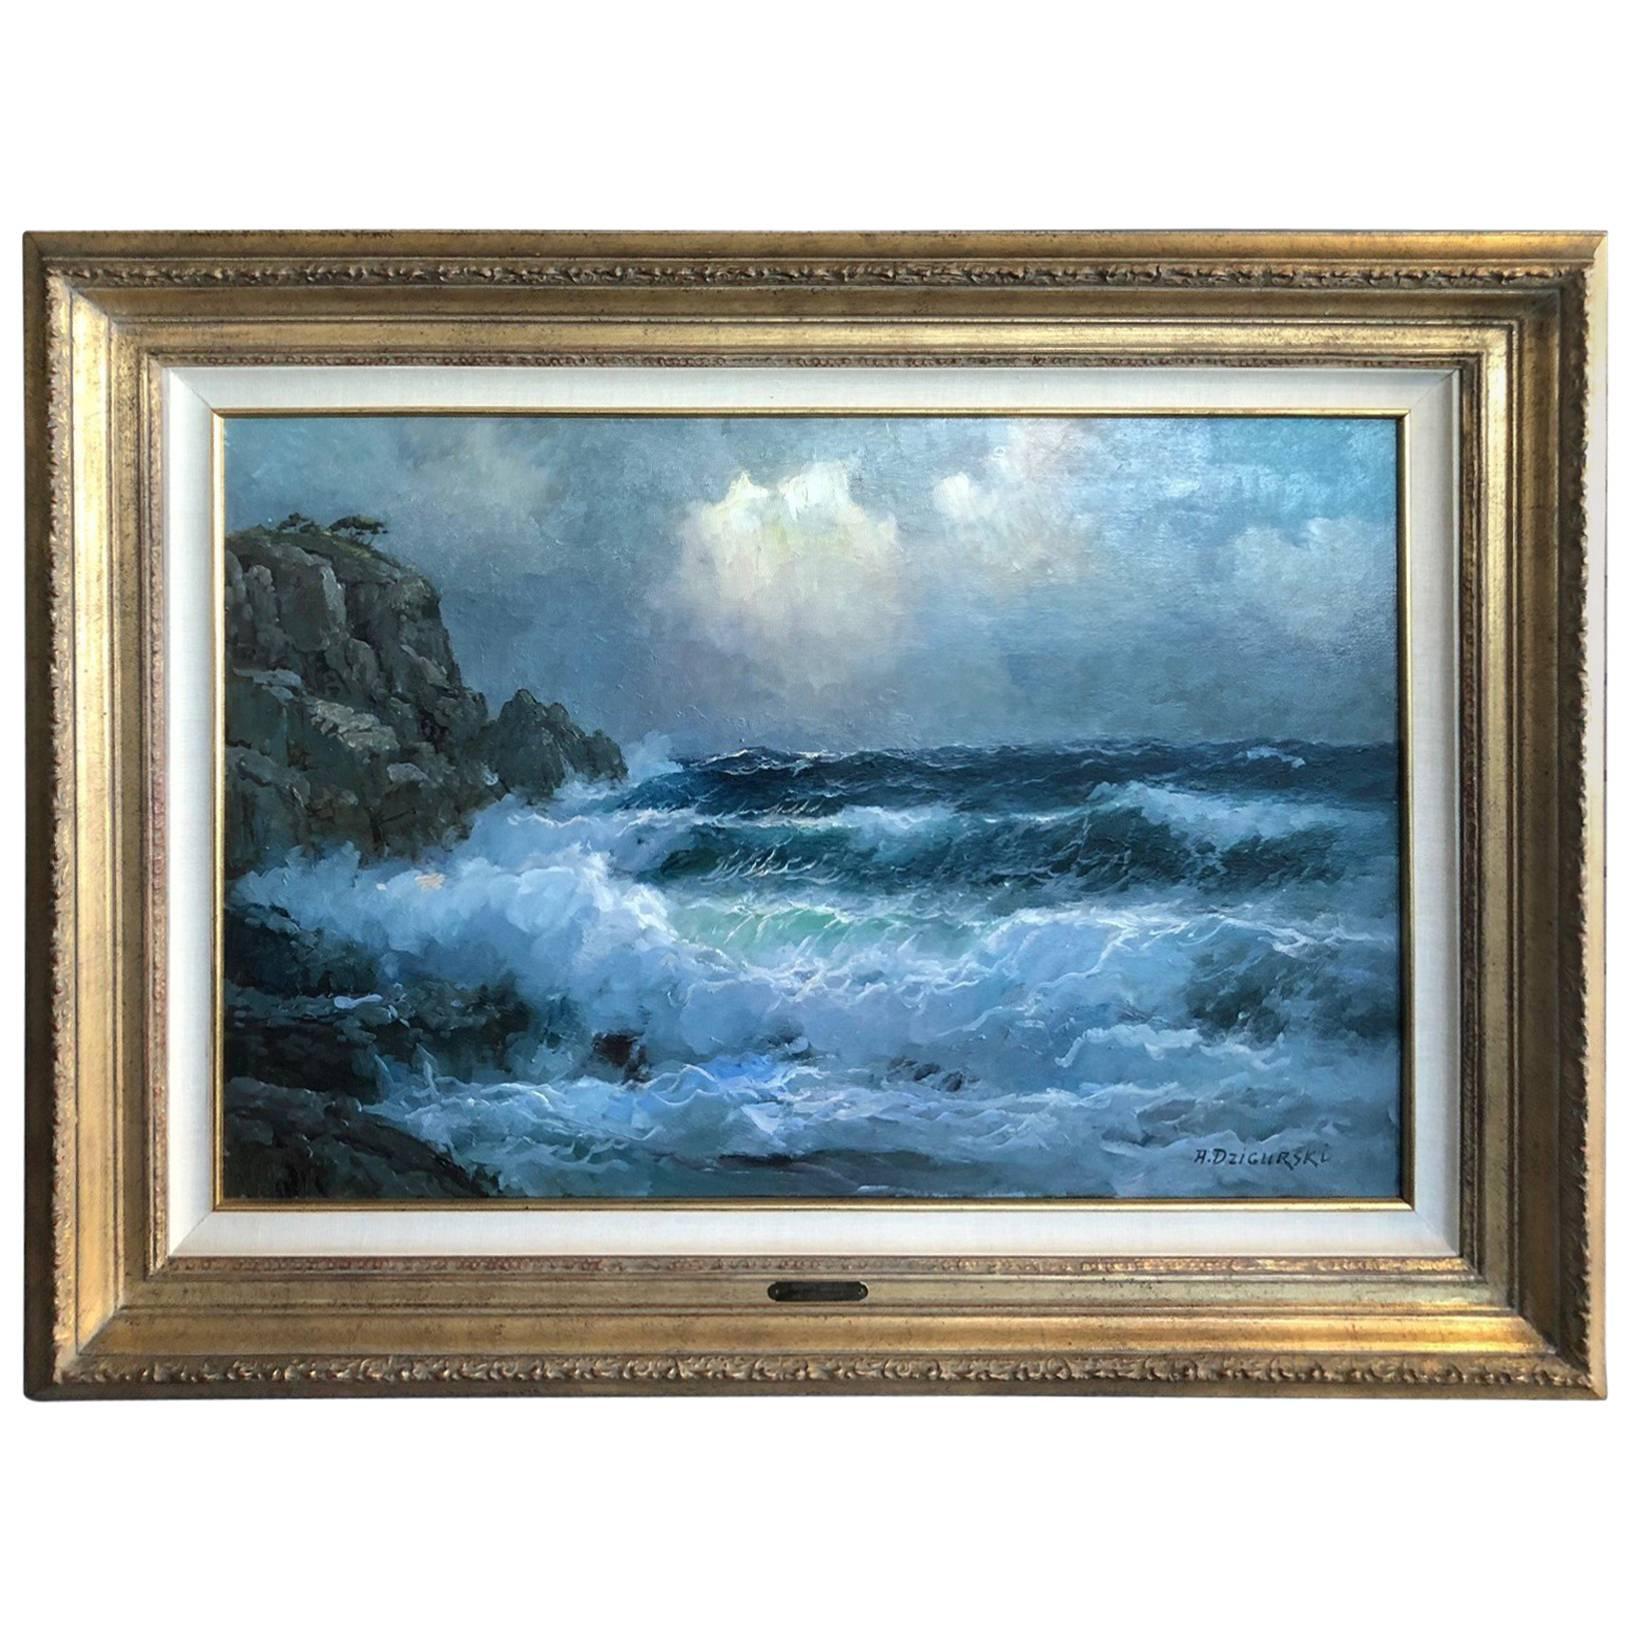 Seascape Painting "Heaven and Sea" by Alexander Dzigurski